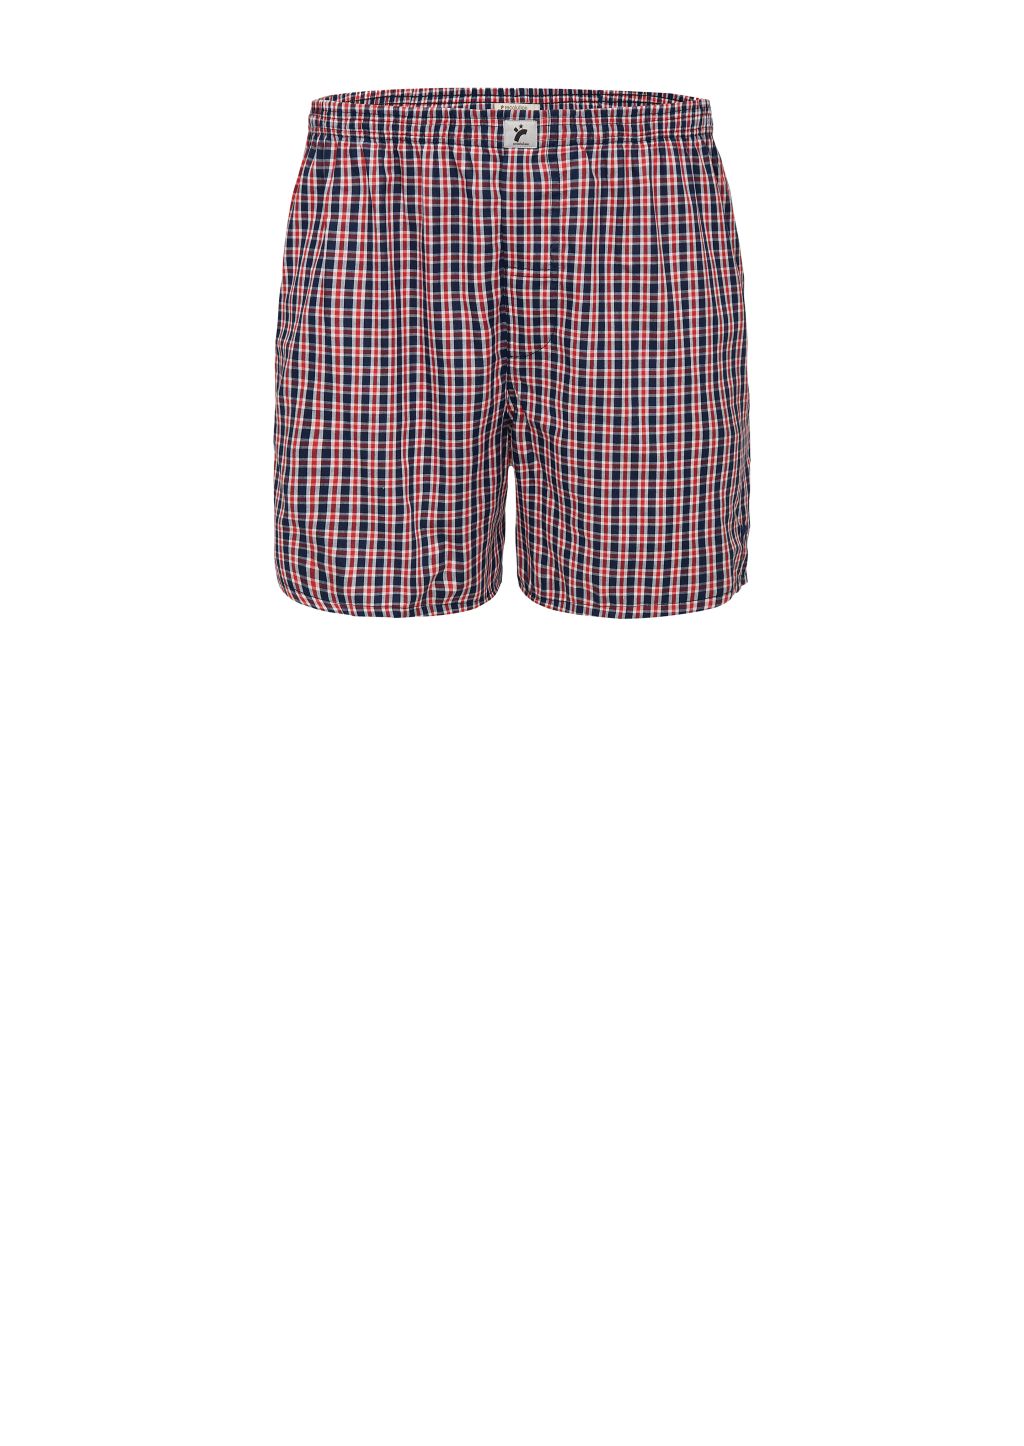 Männer Boxershorts #Checked Blue/White/Red Checked L